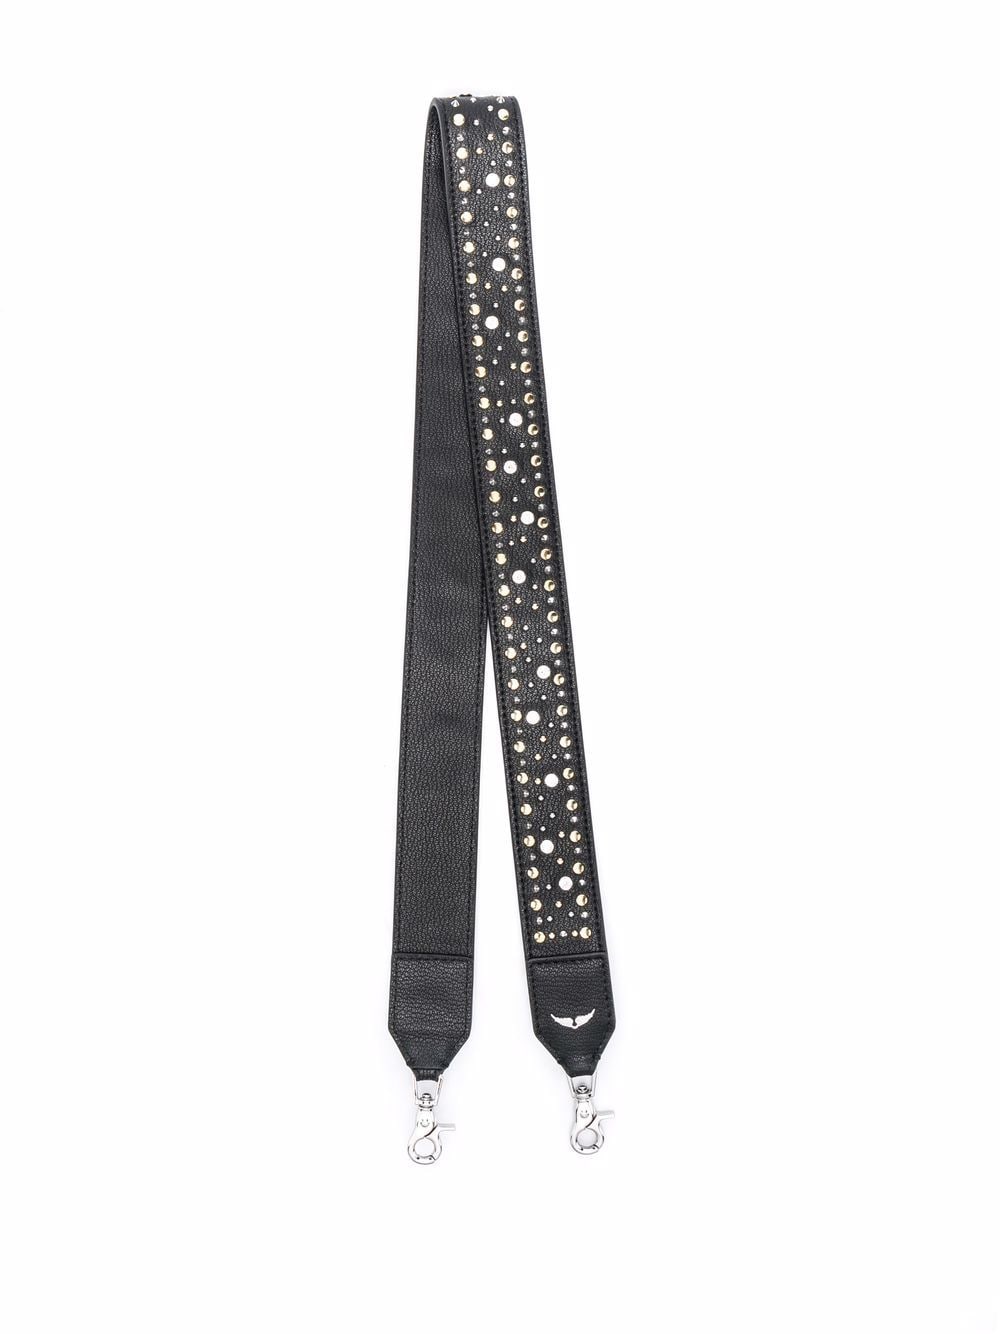 Zadig&Voltaire Studded Shoulder Leather Strap - Farfetch